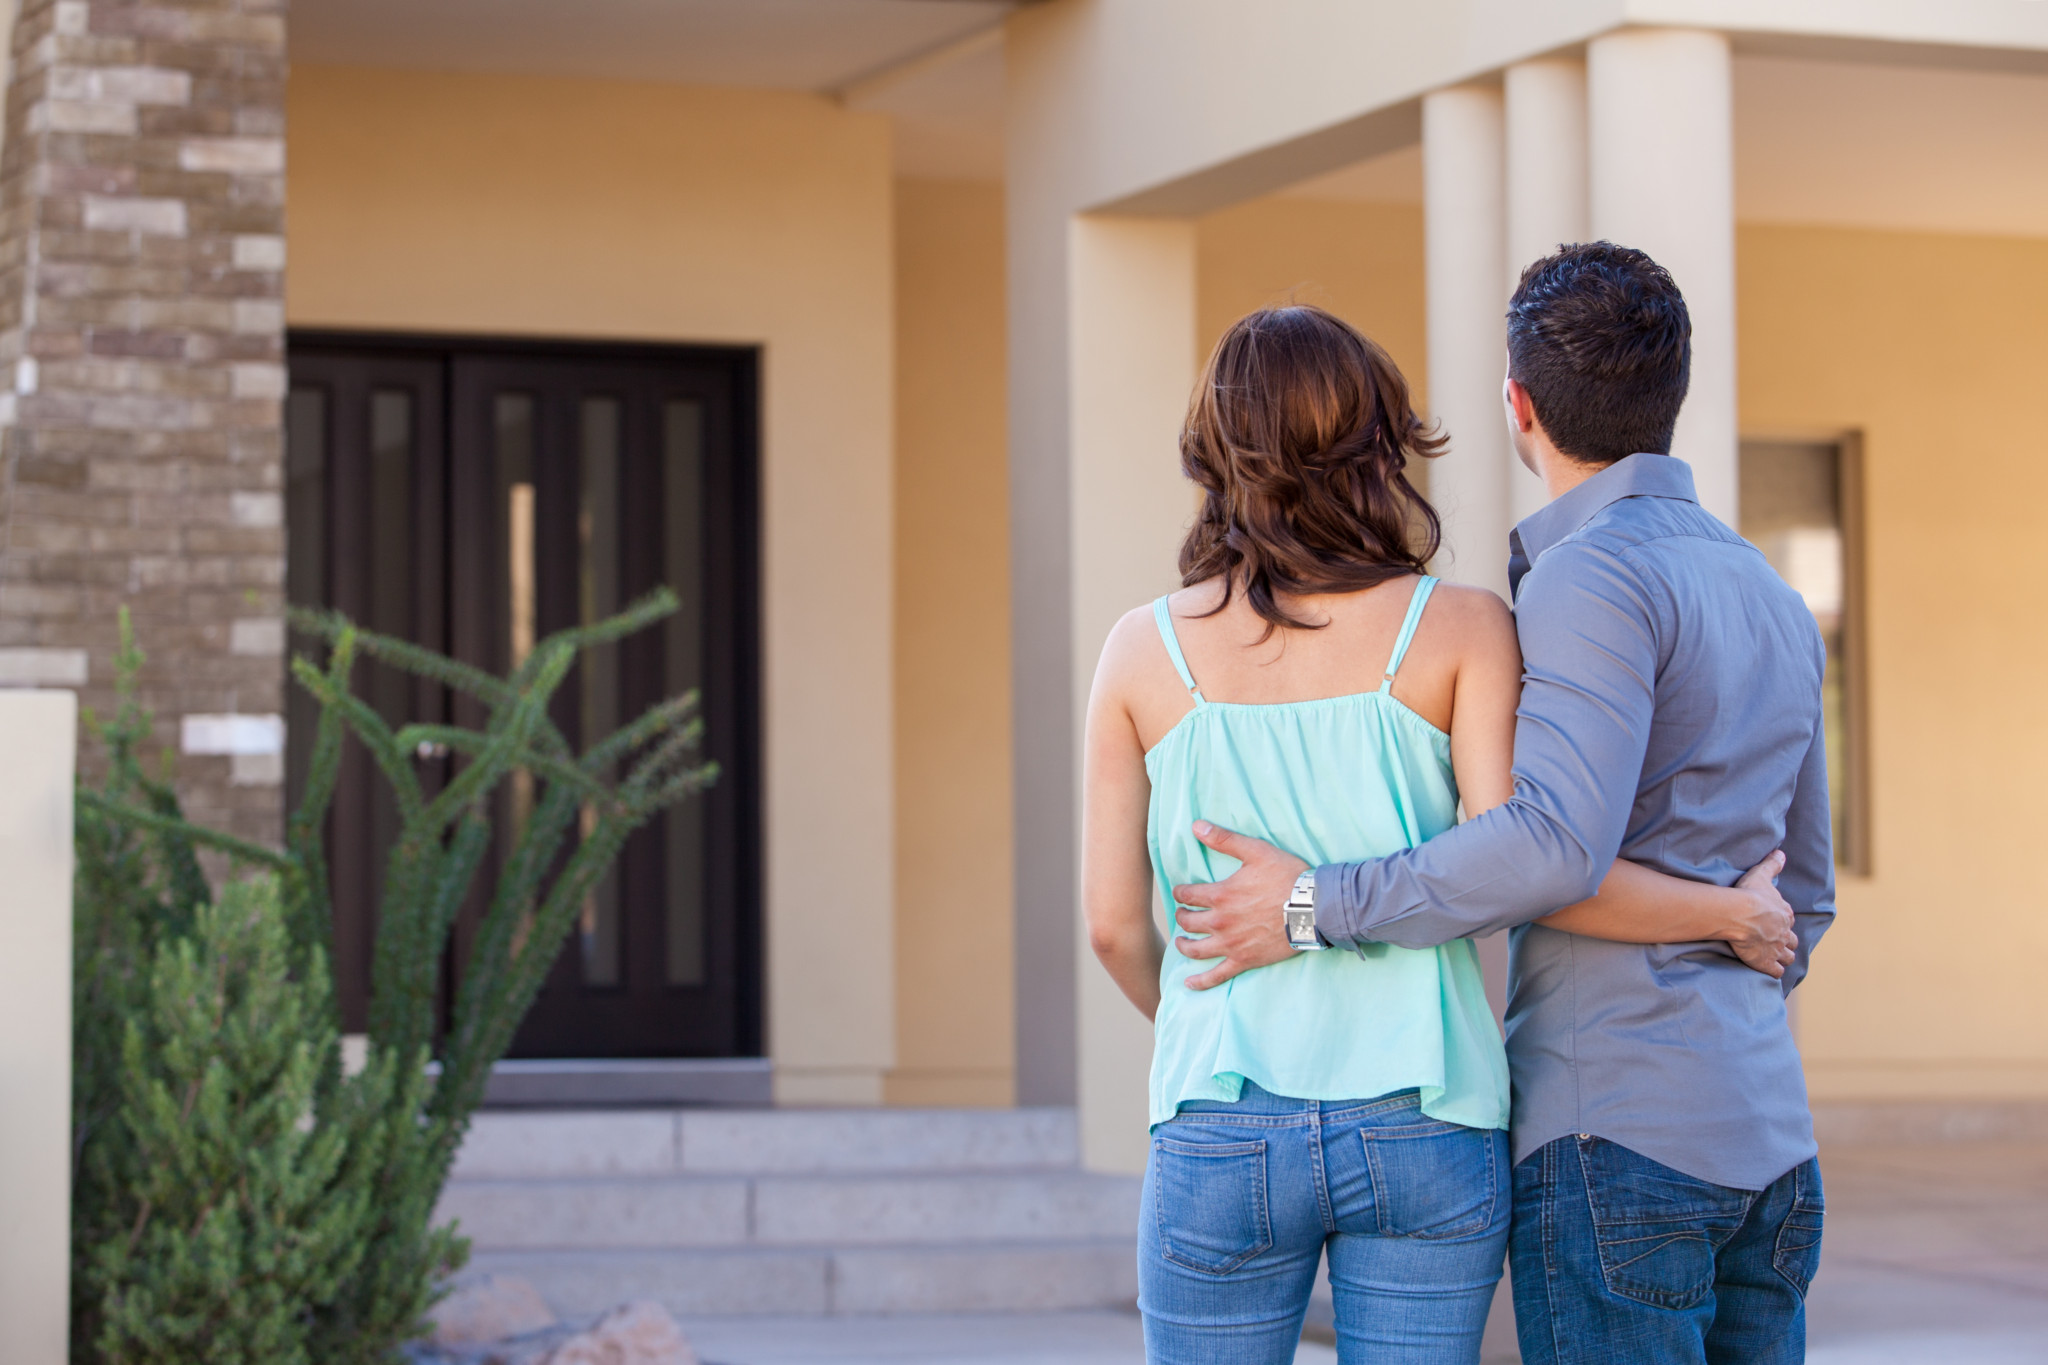 Get your dream home in the safety of a community.